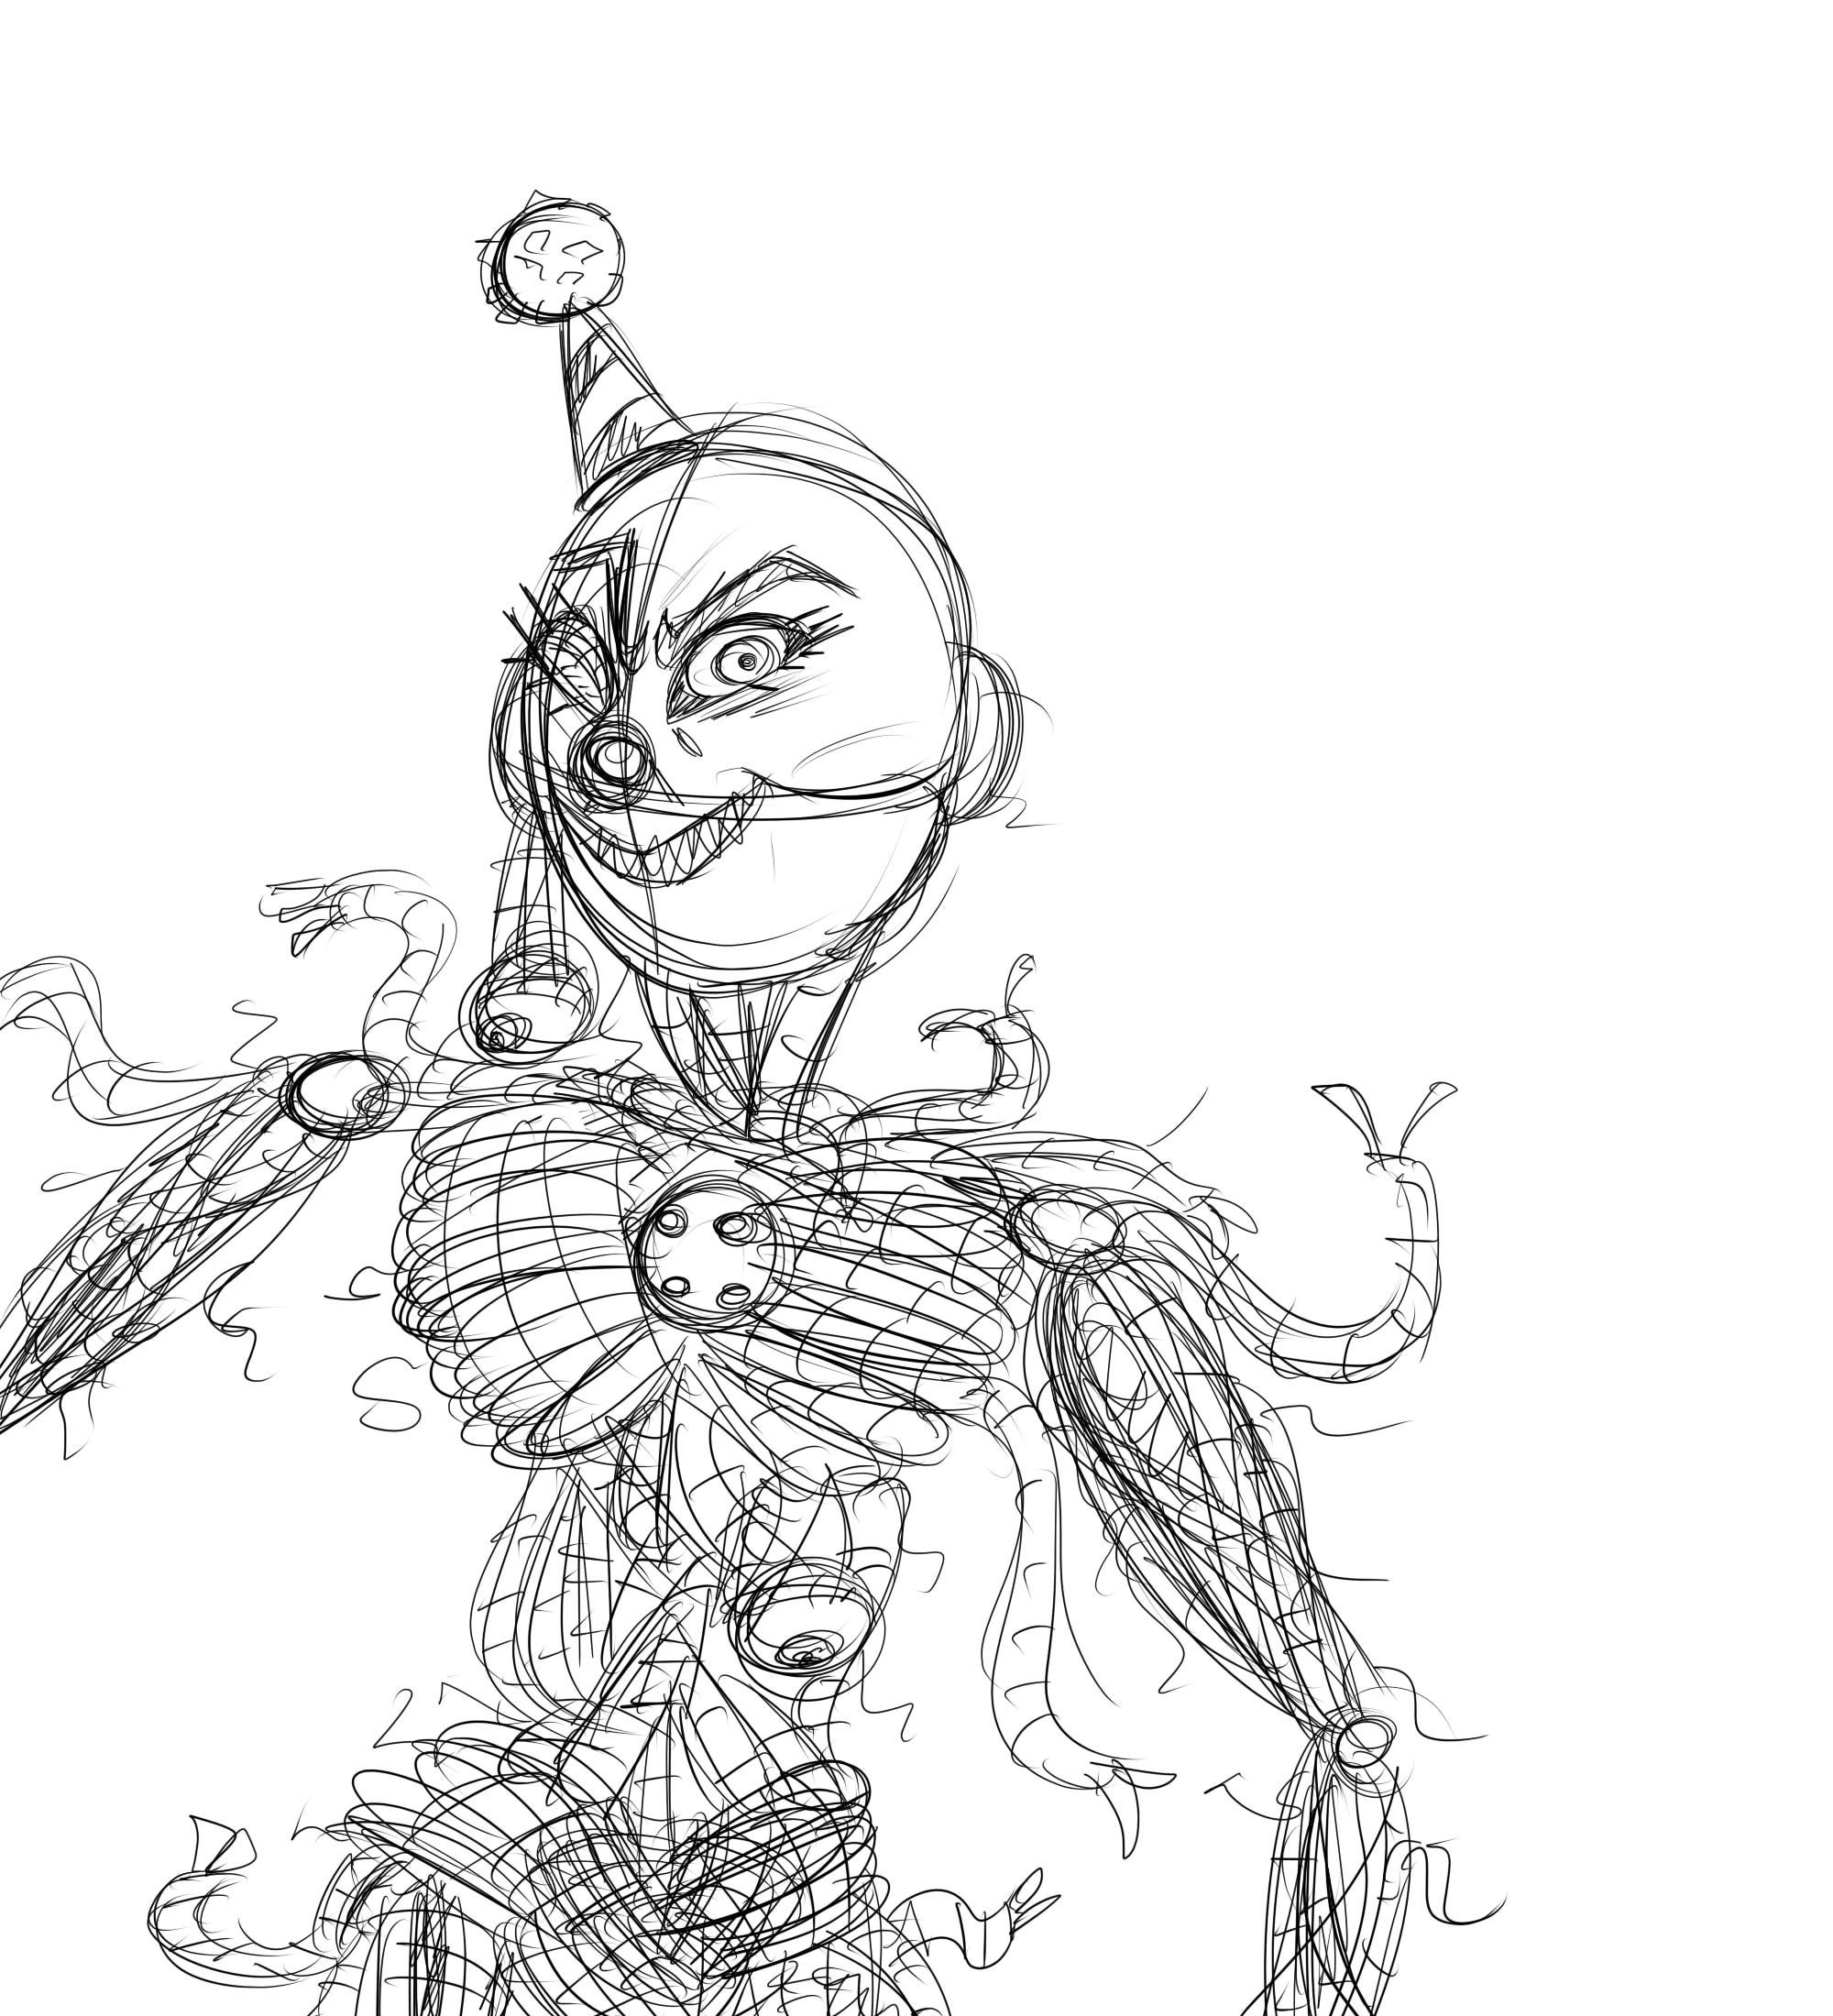 Ennard Coloring Pages Check out inspiring examples of ennard artwork on  deviantart and get inspired by our community of talented artists